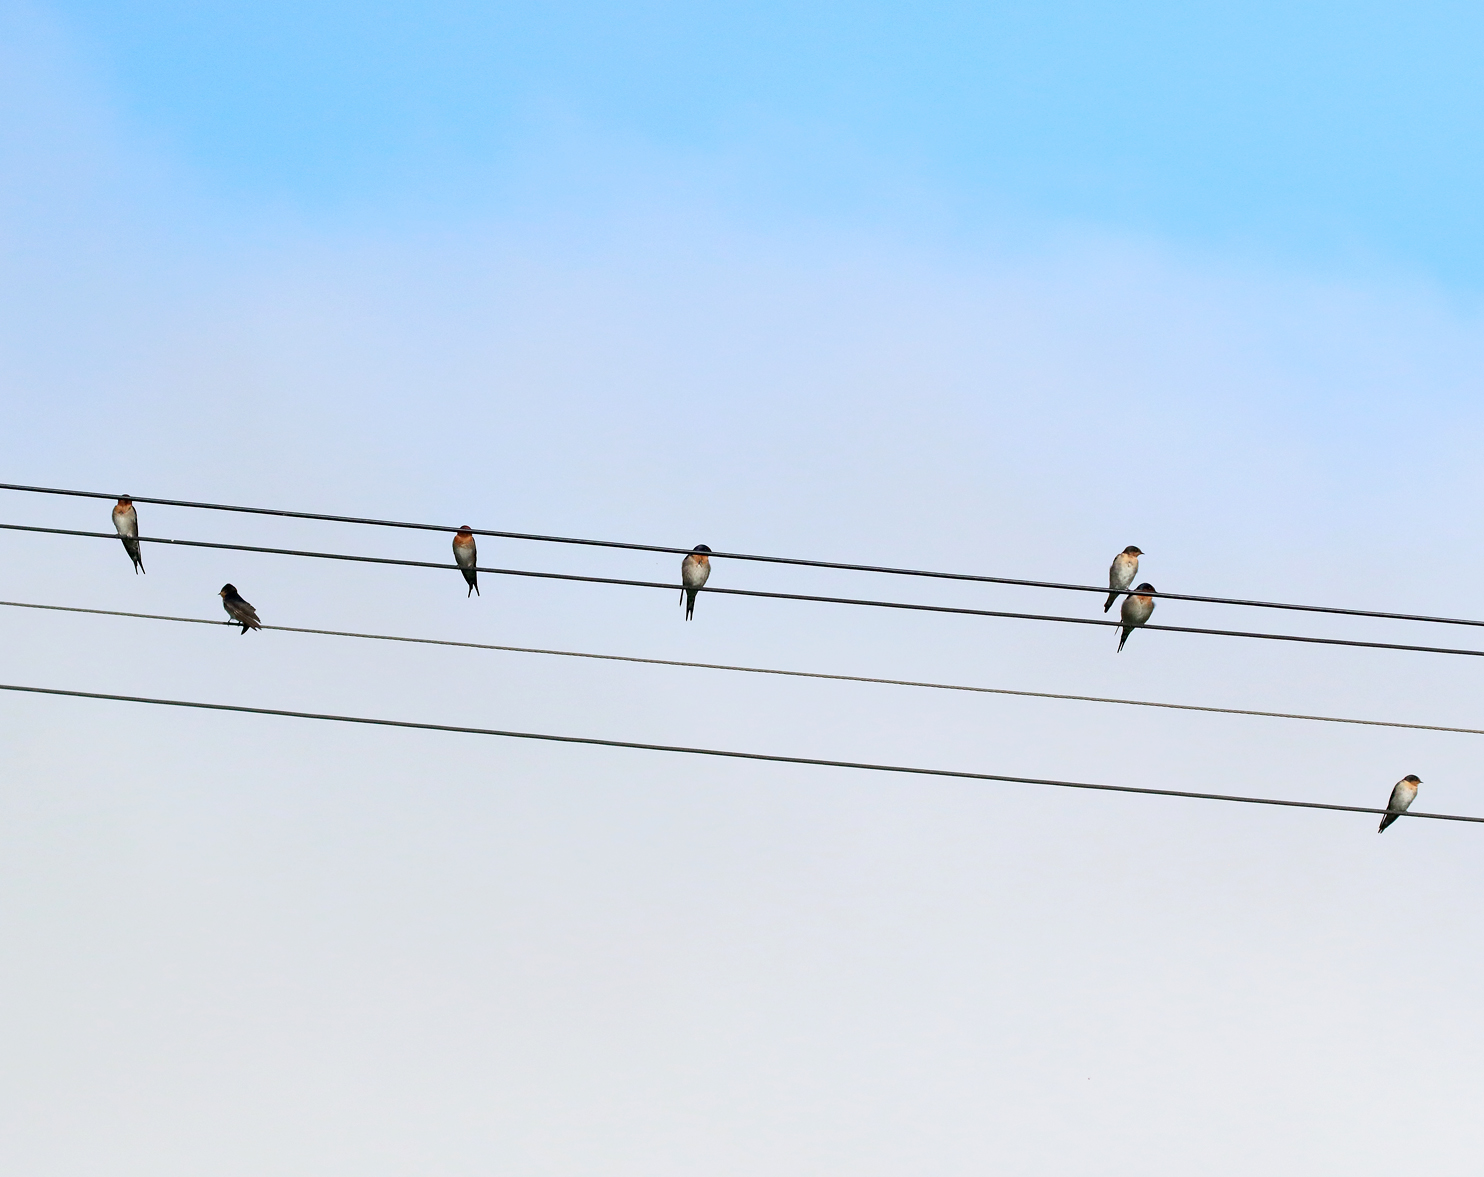 1V8A5718 swallows on wire.JPG